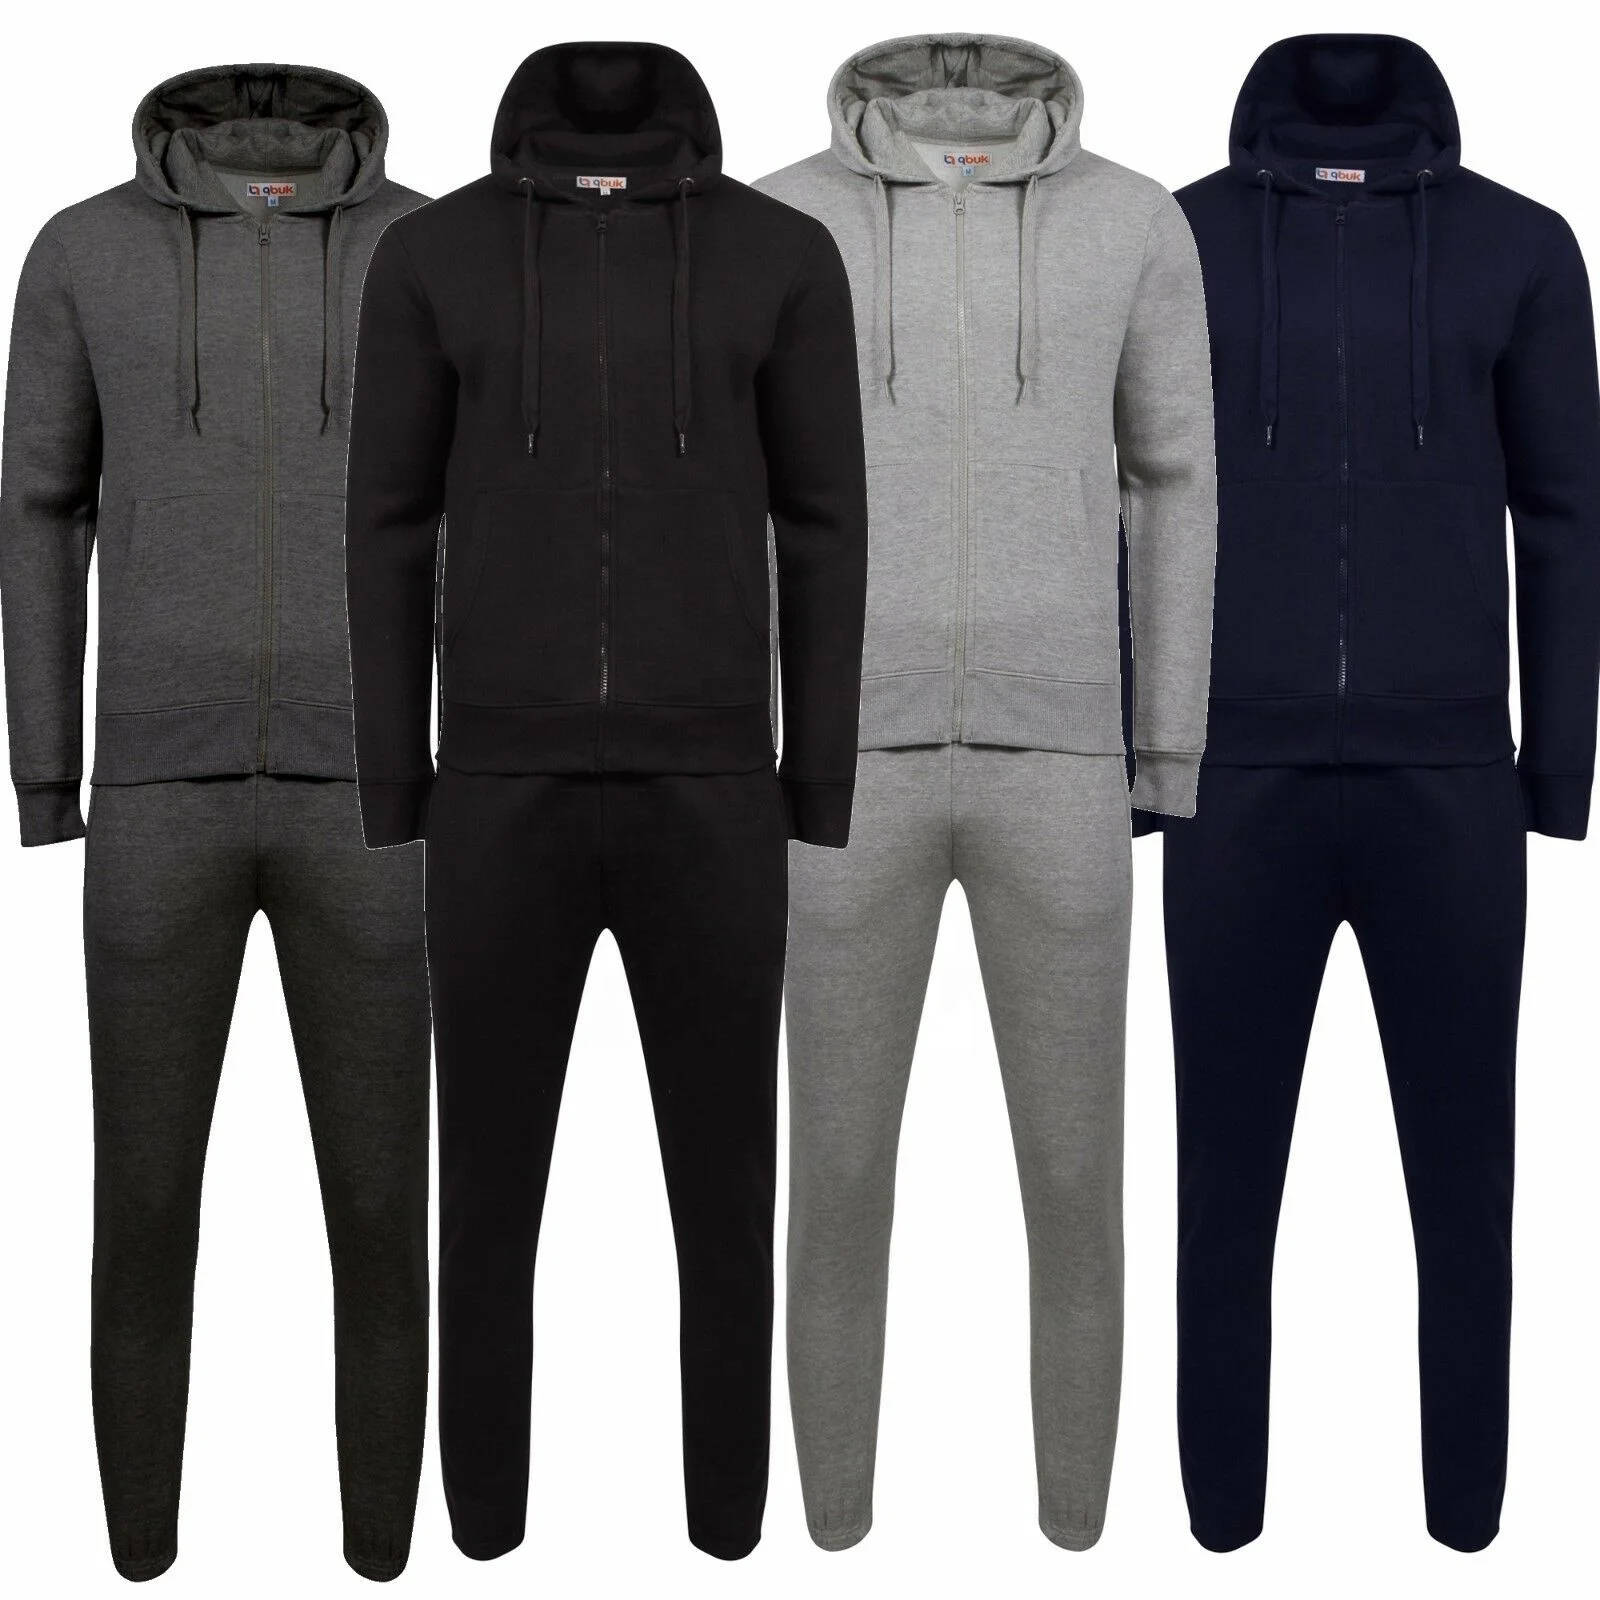 GYM POWER Fleece Hoodie Jogging Suit Full Sleeves Warm Up Mens Trousers S M L XL 